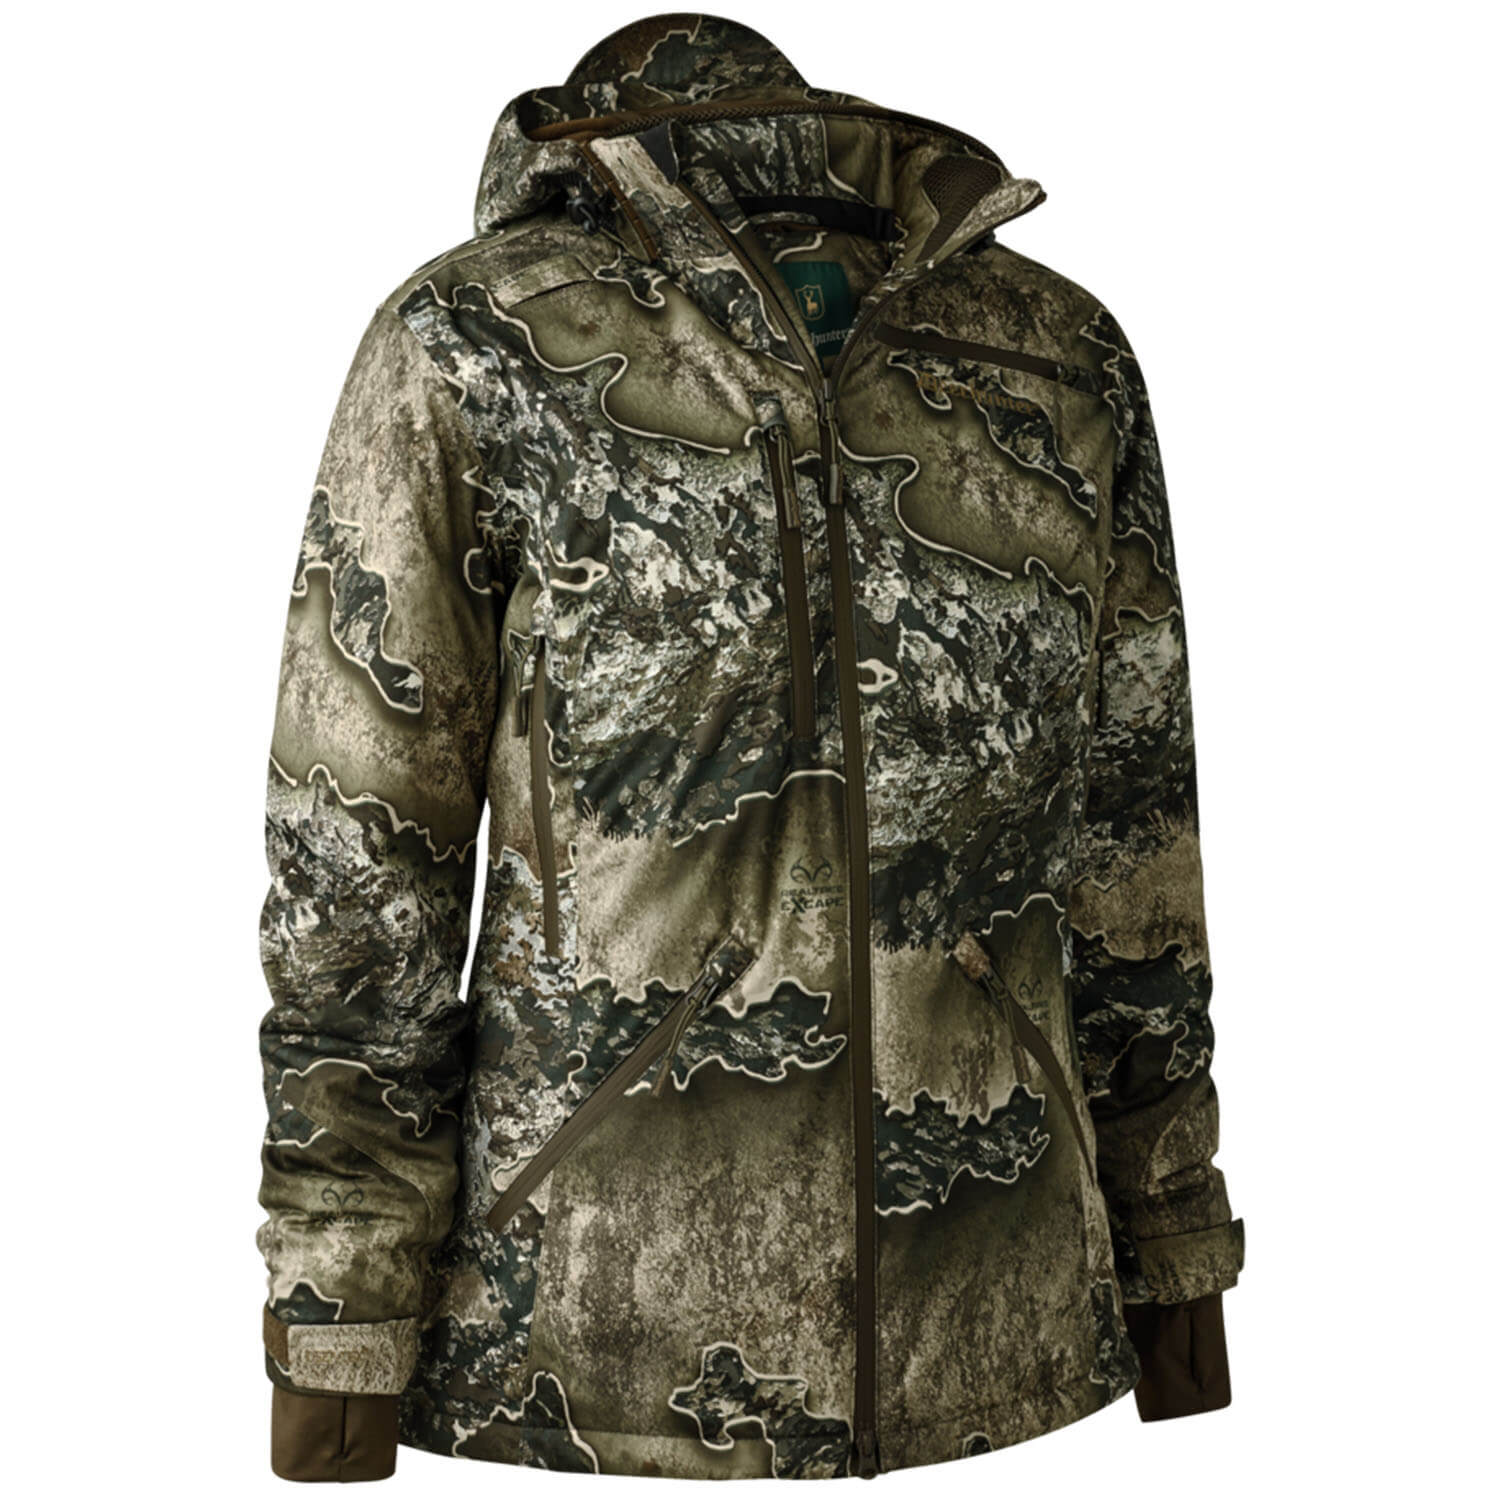 Deerhunter winter jacket Lady Excape (realtree excape) - Winter Hunting Clothing